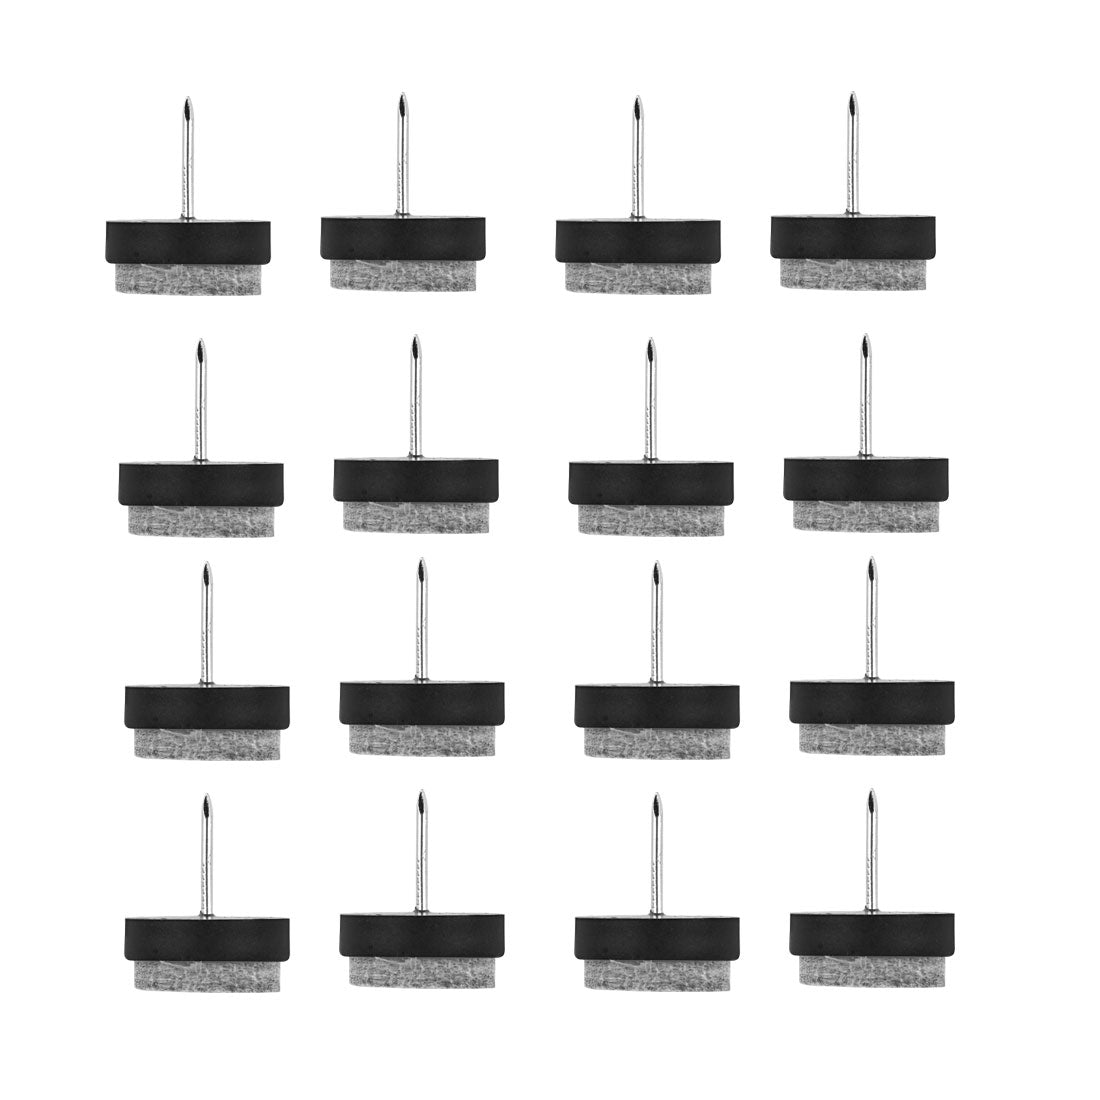 uxcell Uxcell Felt Pad Nails Glides Floor Protector Reduces Noise Anti-scratch Anti-slip for Furniture Chair Table Leg Feet Black 17mm Dia 16pcs